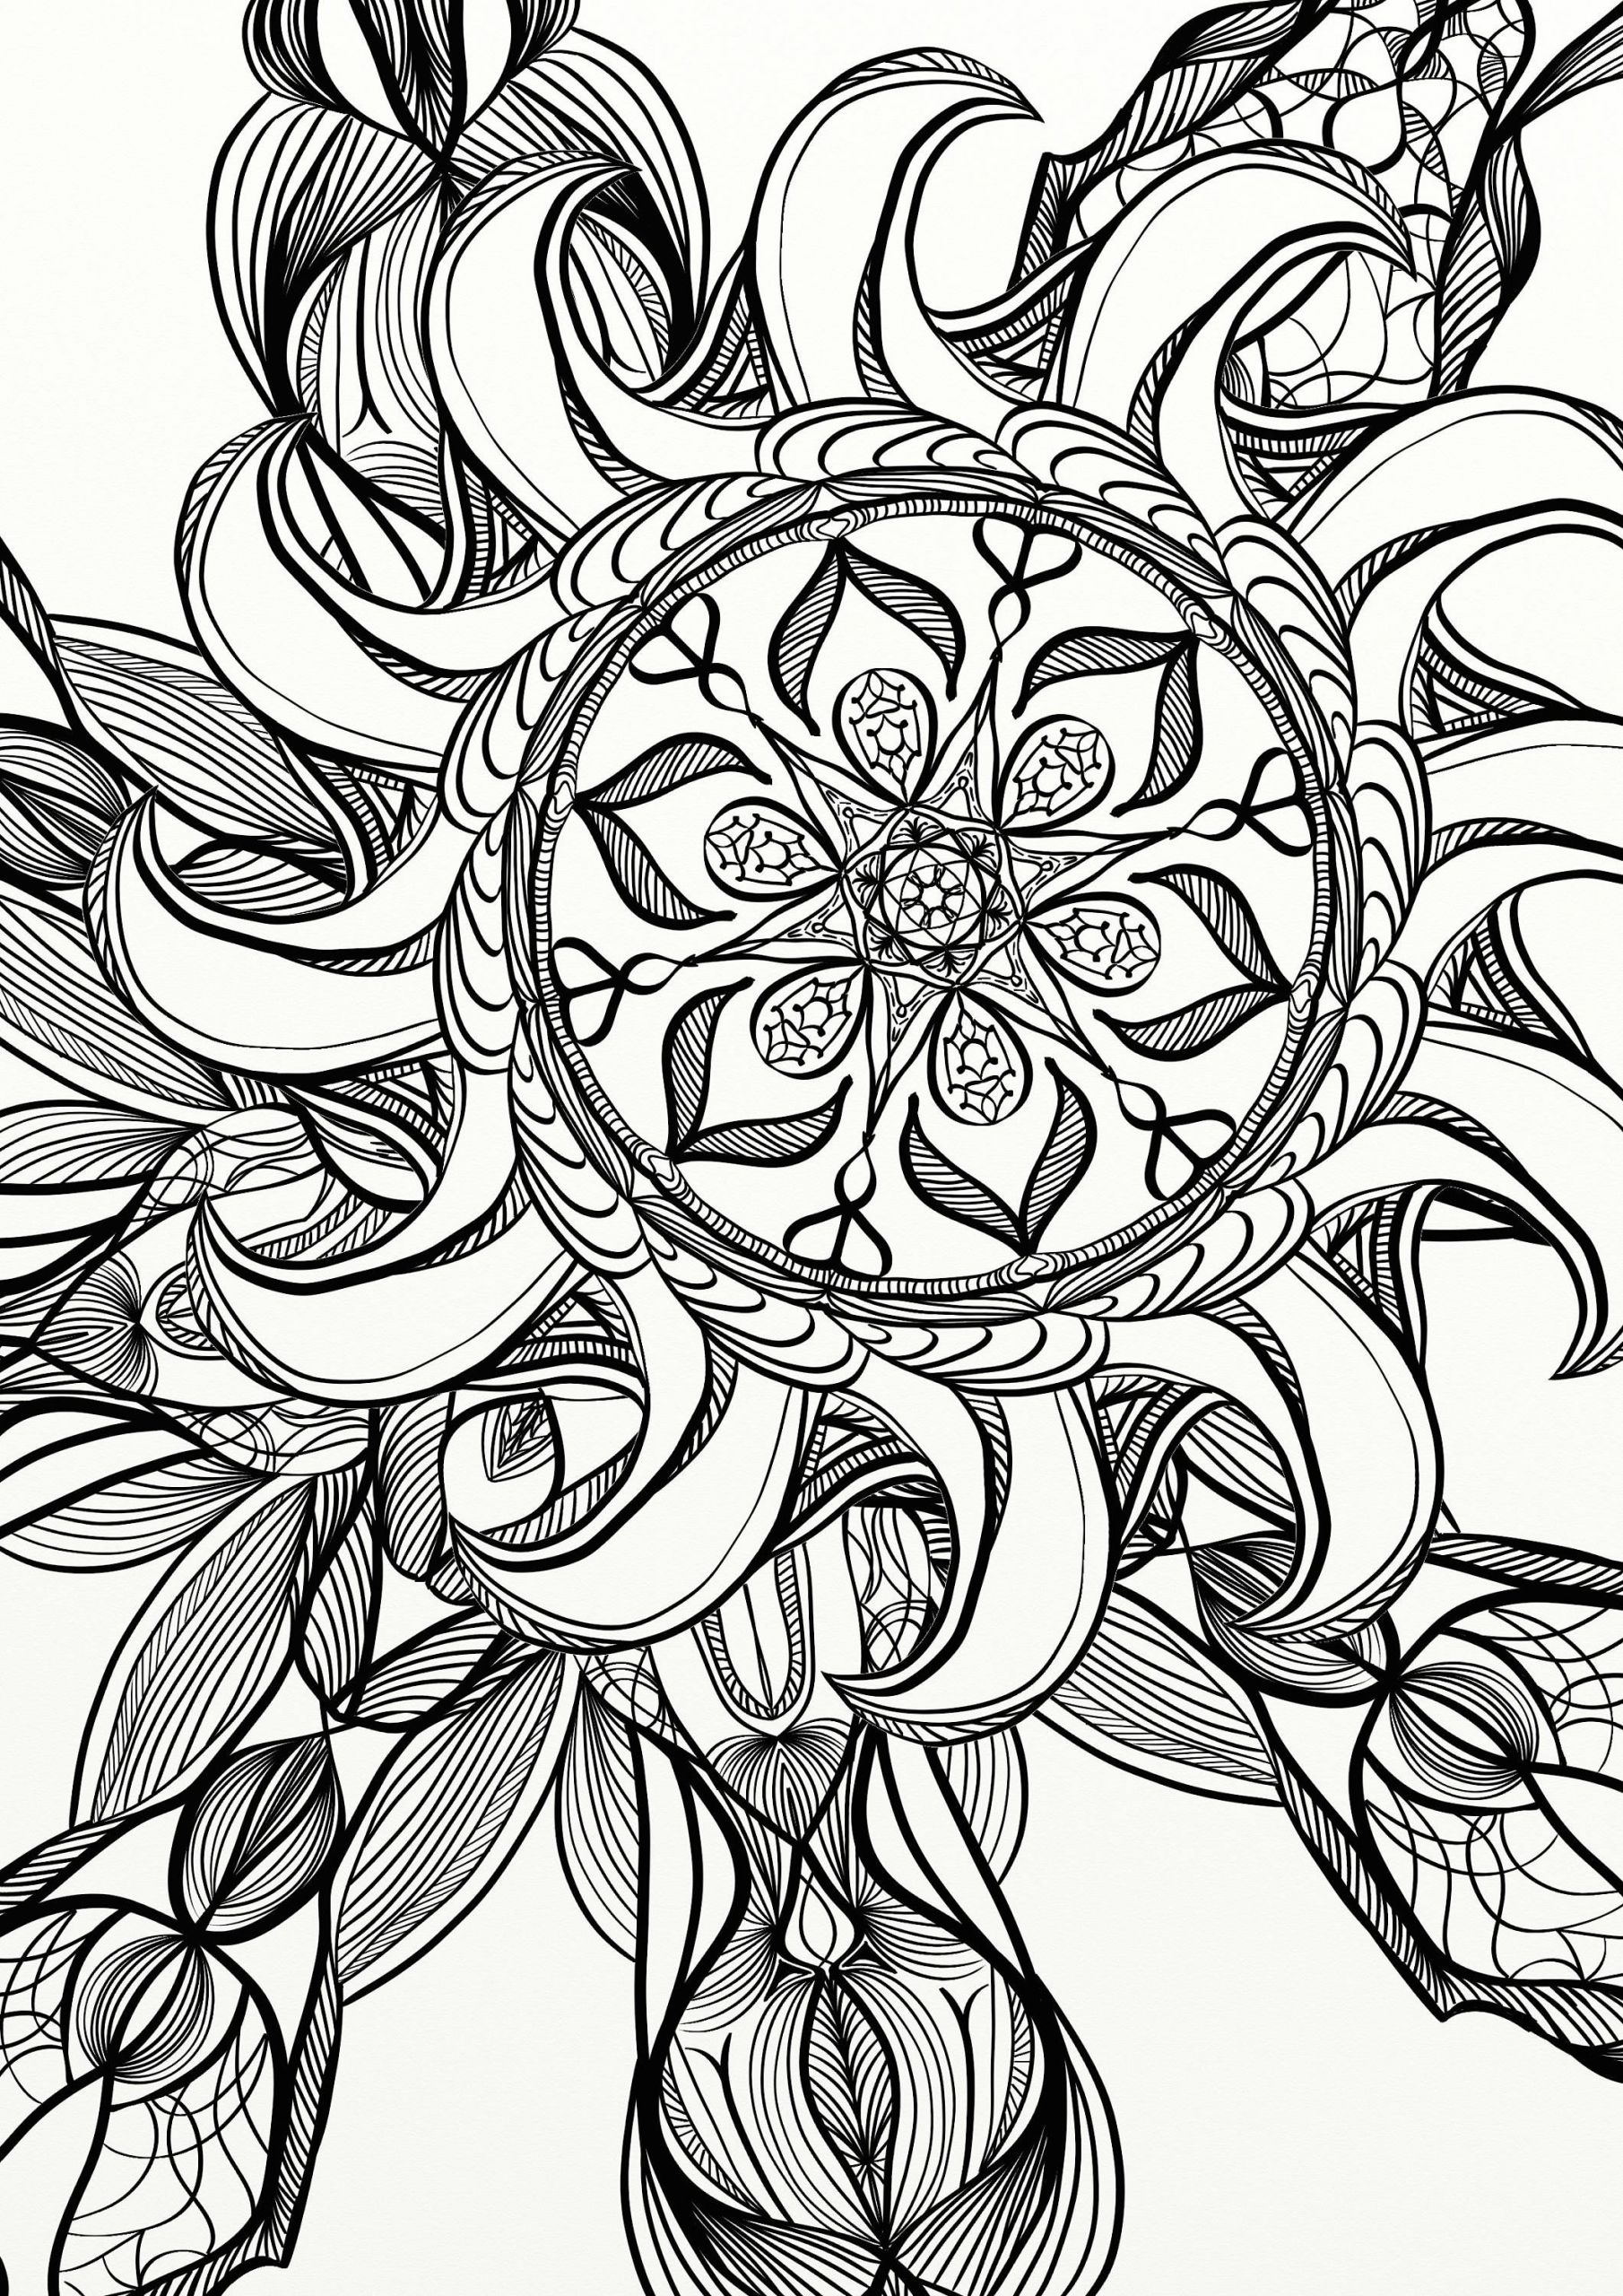 Adult Coloring Book Pages
 Mandala Spiral Relaxing Adult Coloring Page